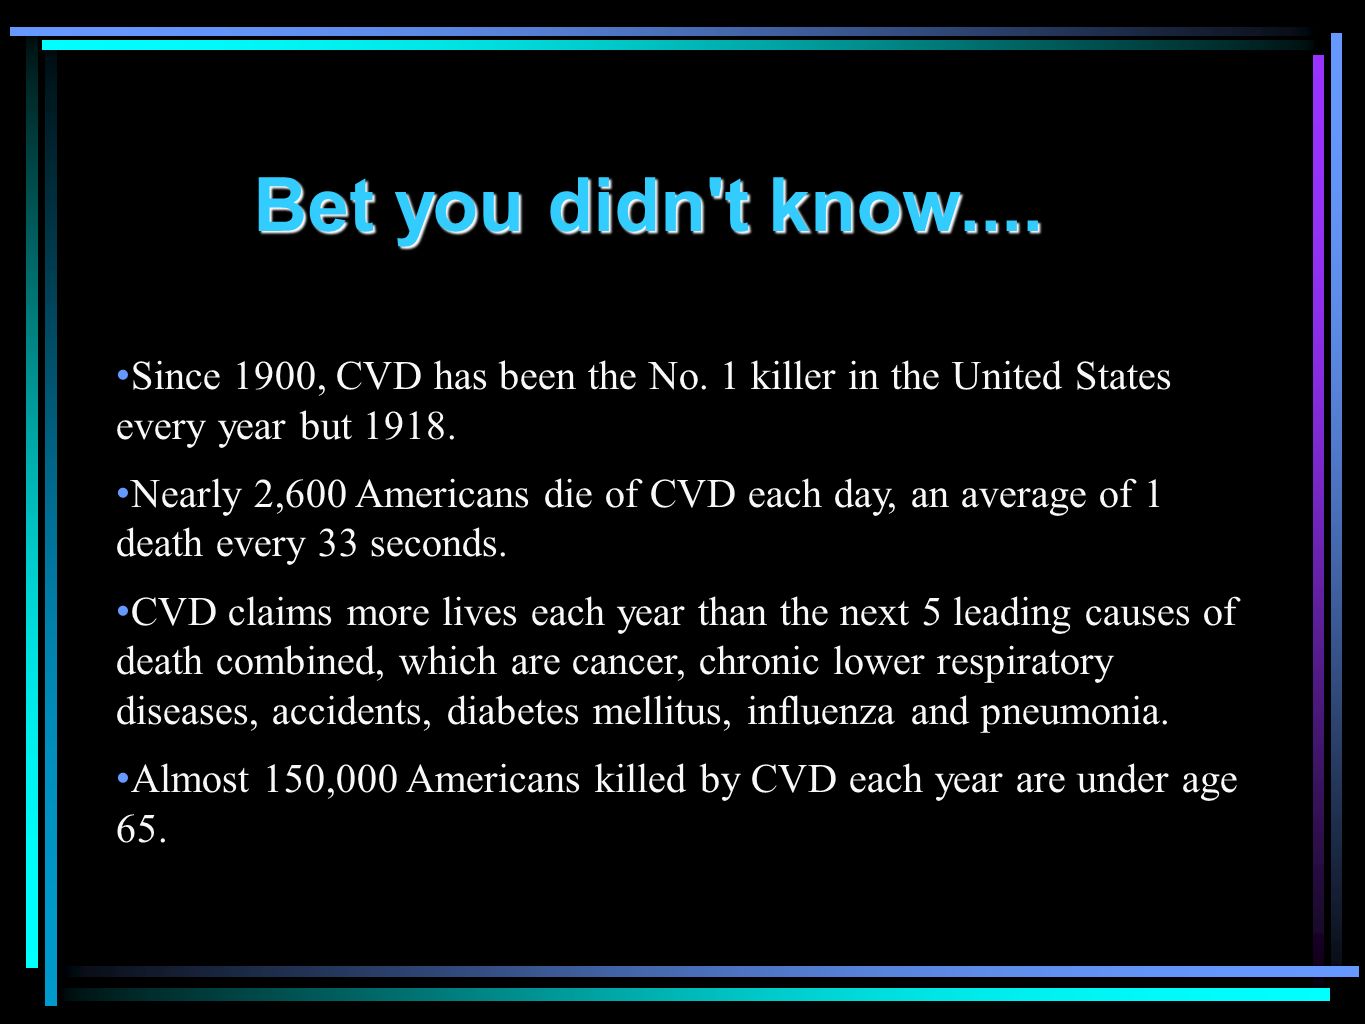 Since 1900, CVD has been the No. 1 killer in the United States every year but